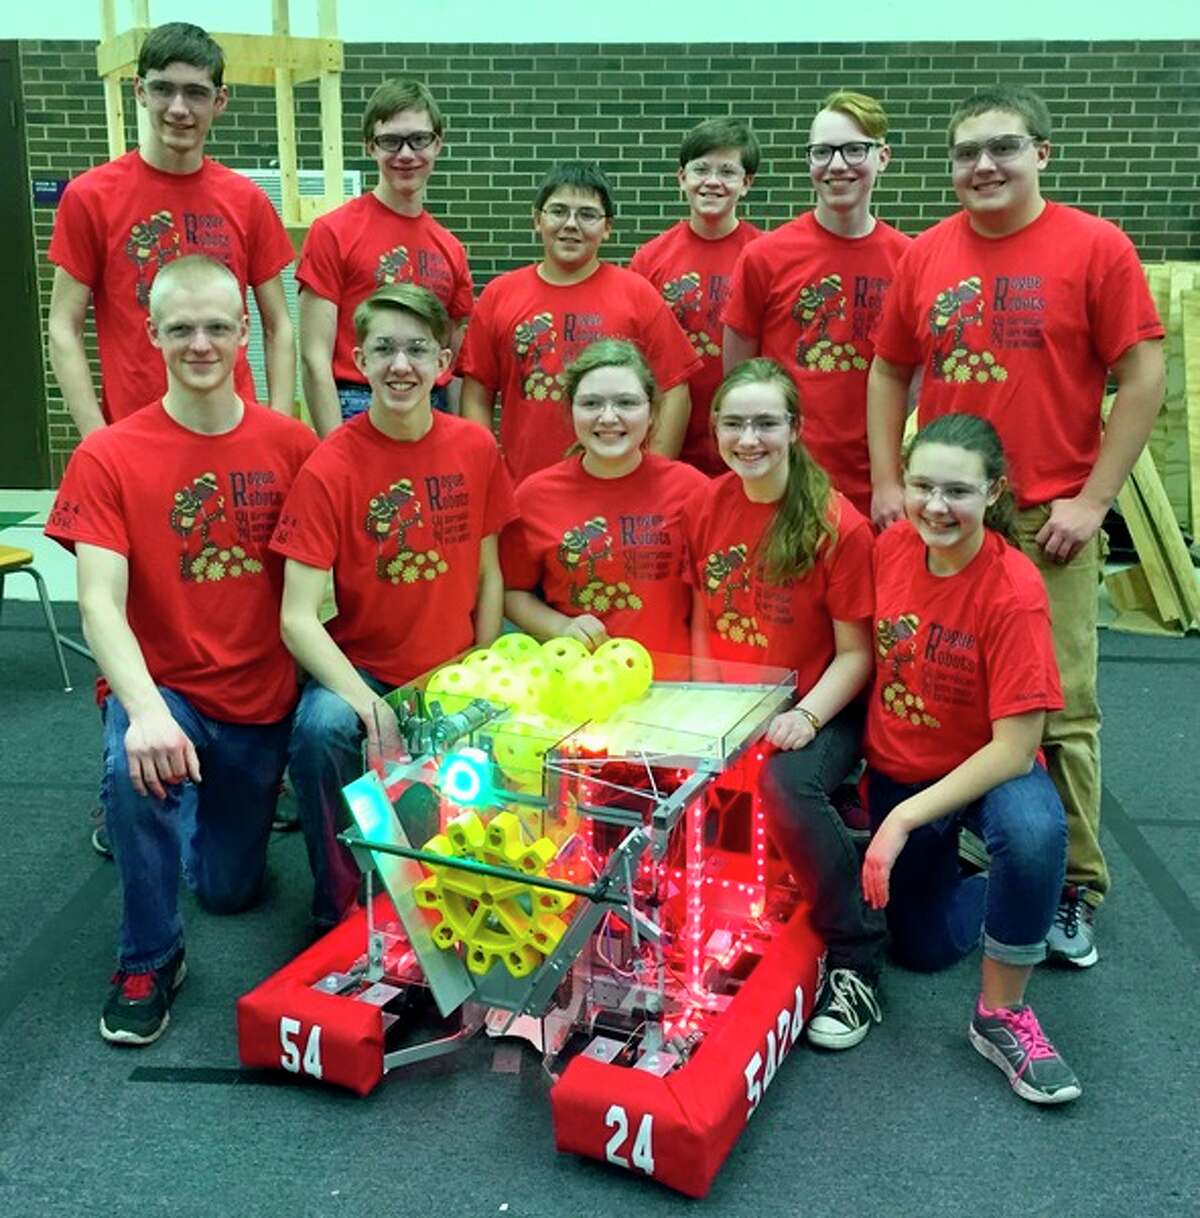 Team members of the Rogue Robots team are: Back row, from left: Isaac Fortier, Aaron Lehman, Drew Kennedy, Trent Huffman, Hayden Aspiranti and Karsten Molitor. Front row, from left: Andrew Moots, Micah Klingbeil, Ellie Molitor, Deborah Lehman and Amelia Molitor.